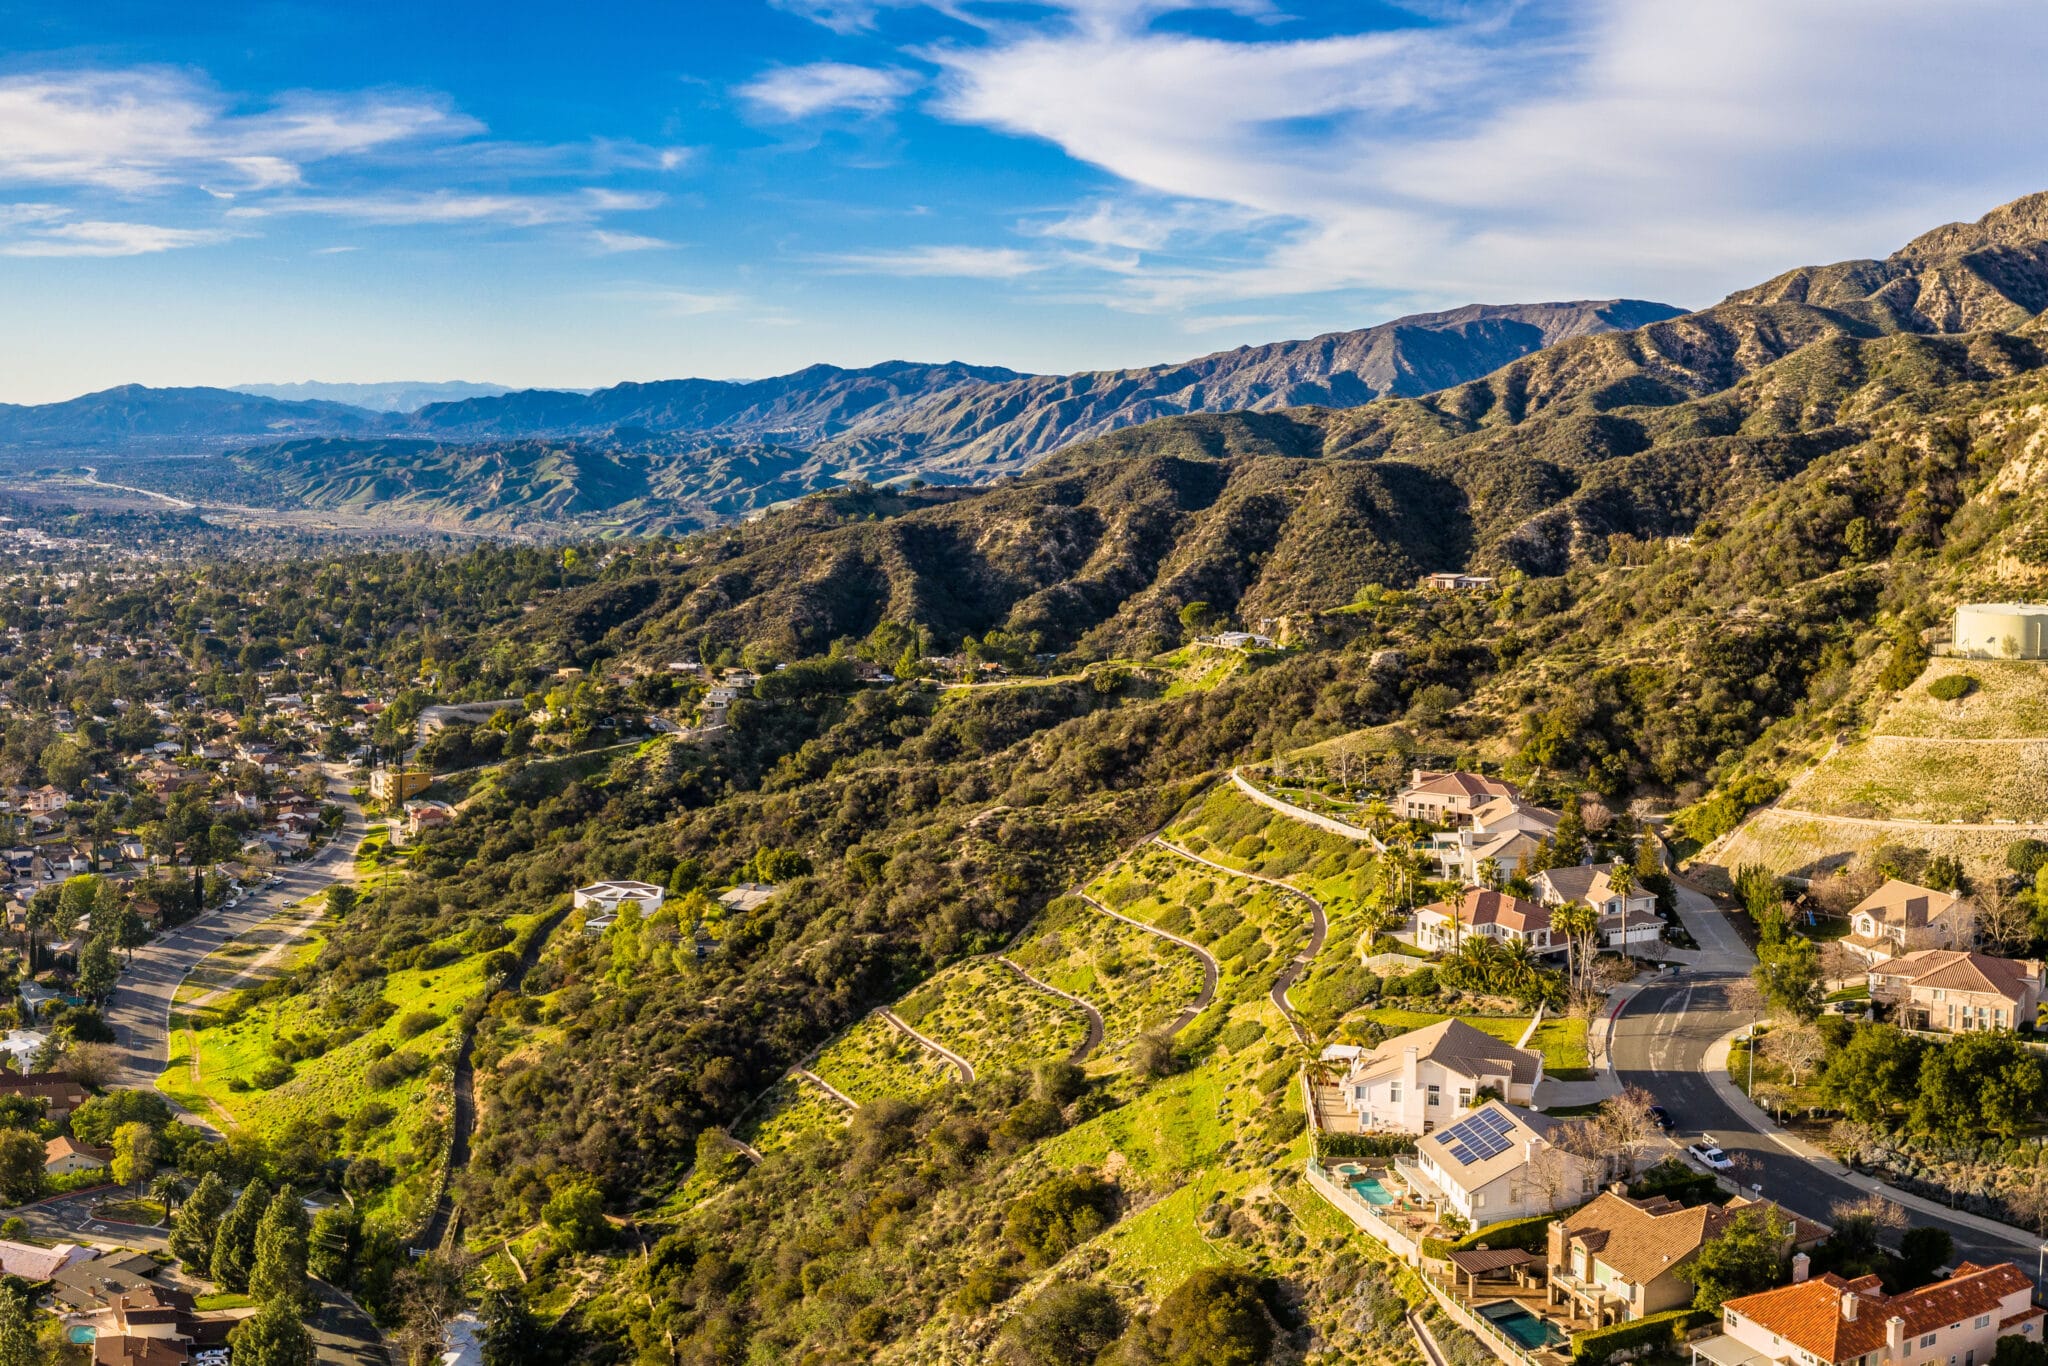 As with most of Southern California, home prices and rents are steadily rising so the best time to invest in a rental property in Baldwin Park is right now.